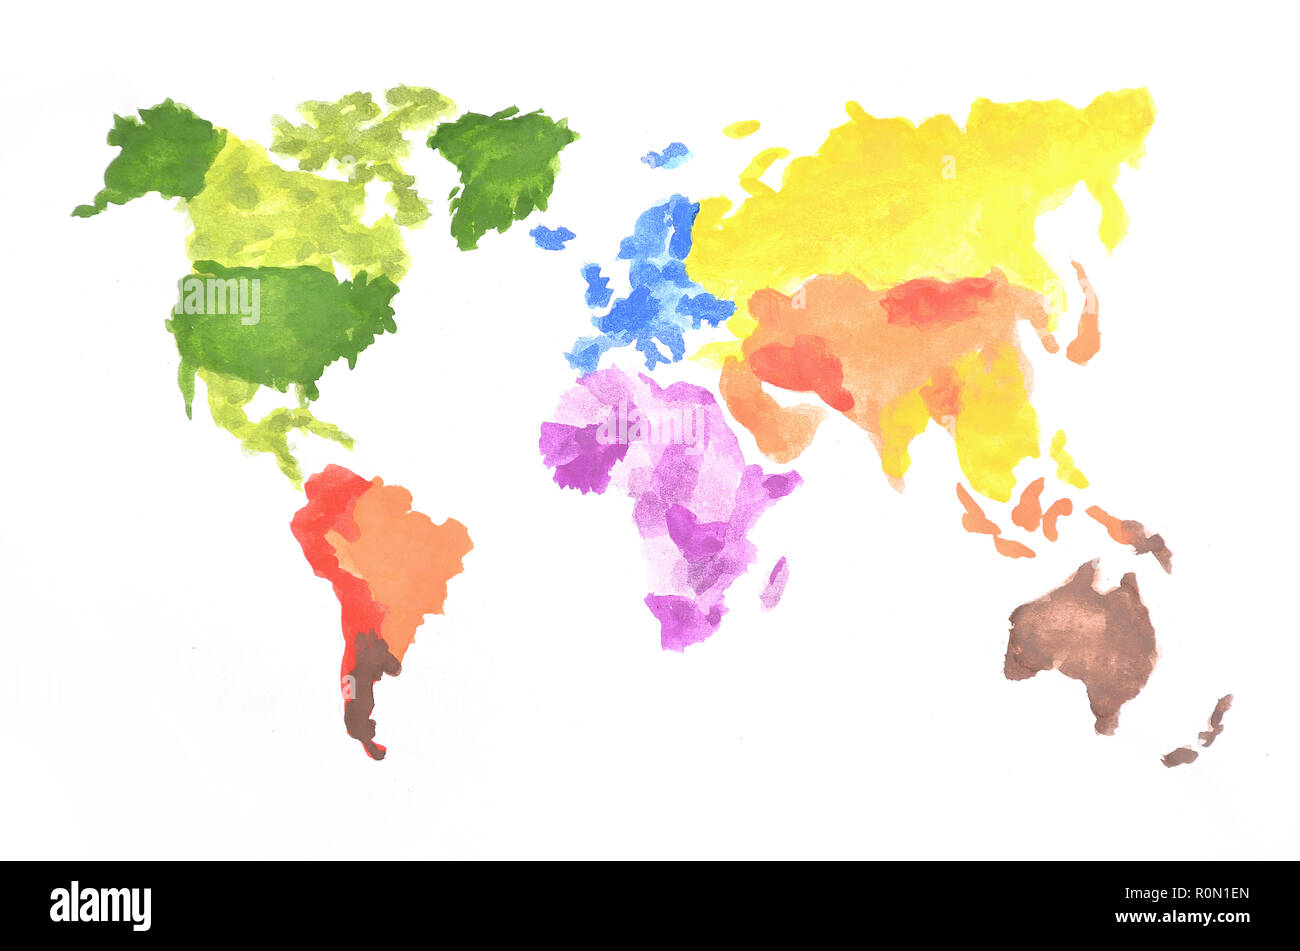 The World Map Is Made With Colored Watercolor Paints On White